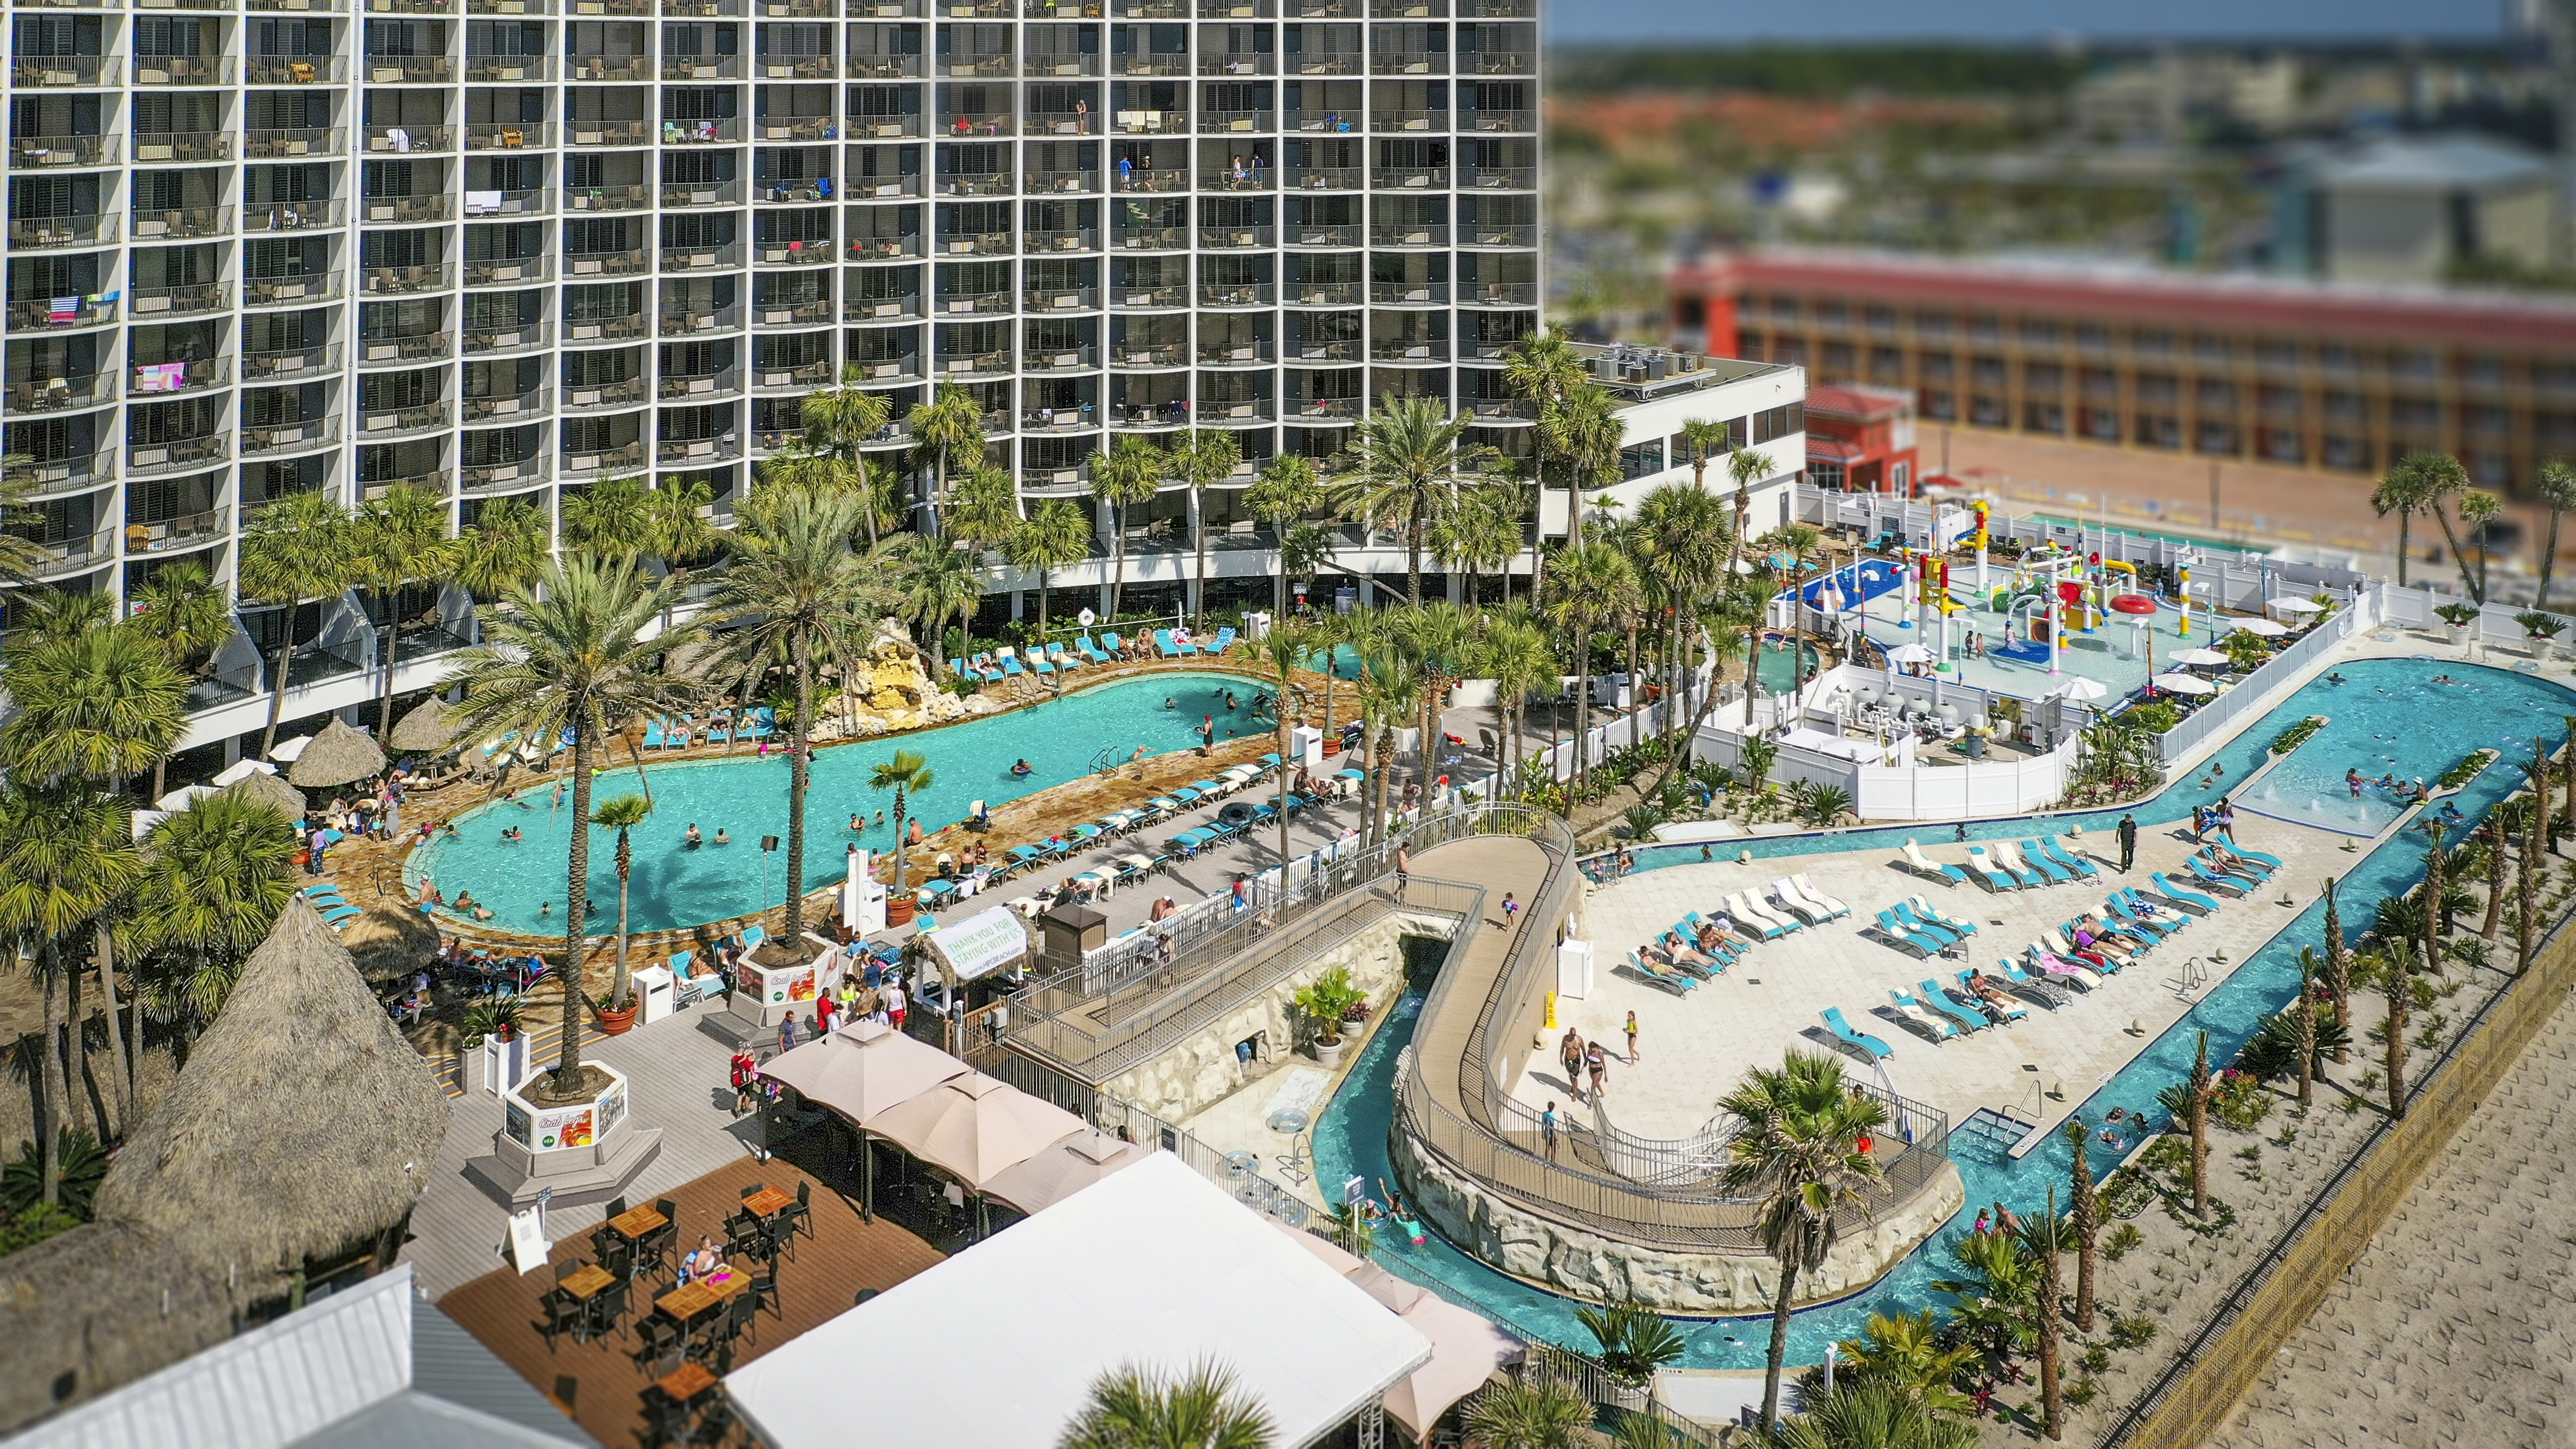 Aerial Photo of The Holiday Inn Resort Pool Deck